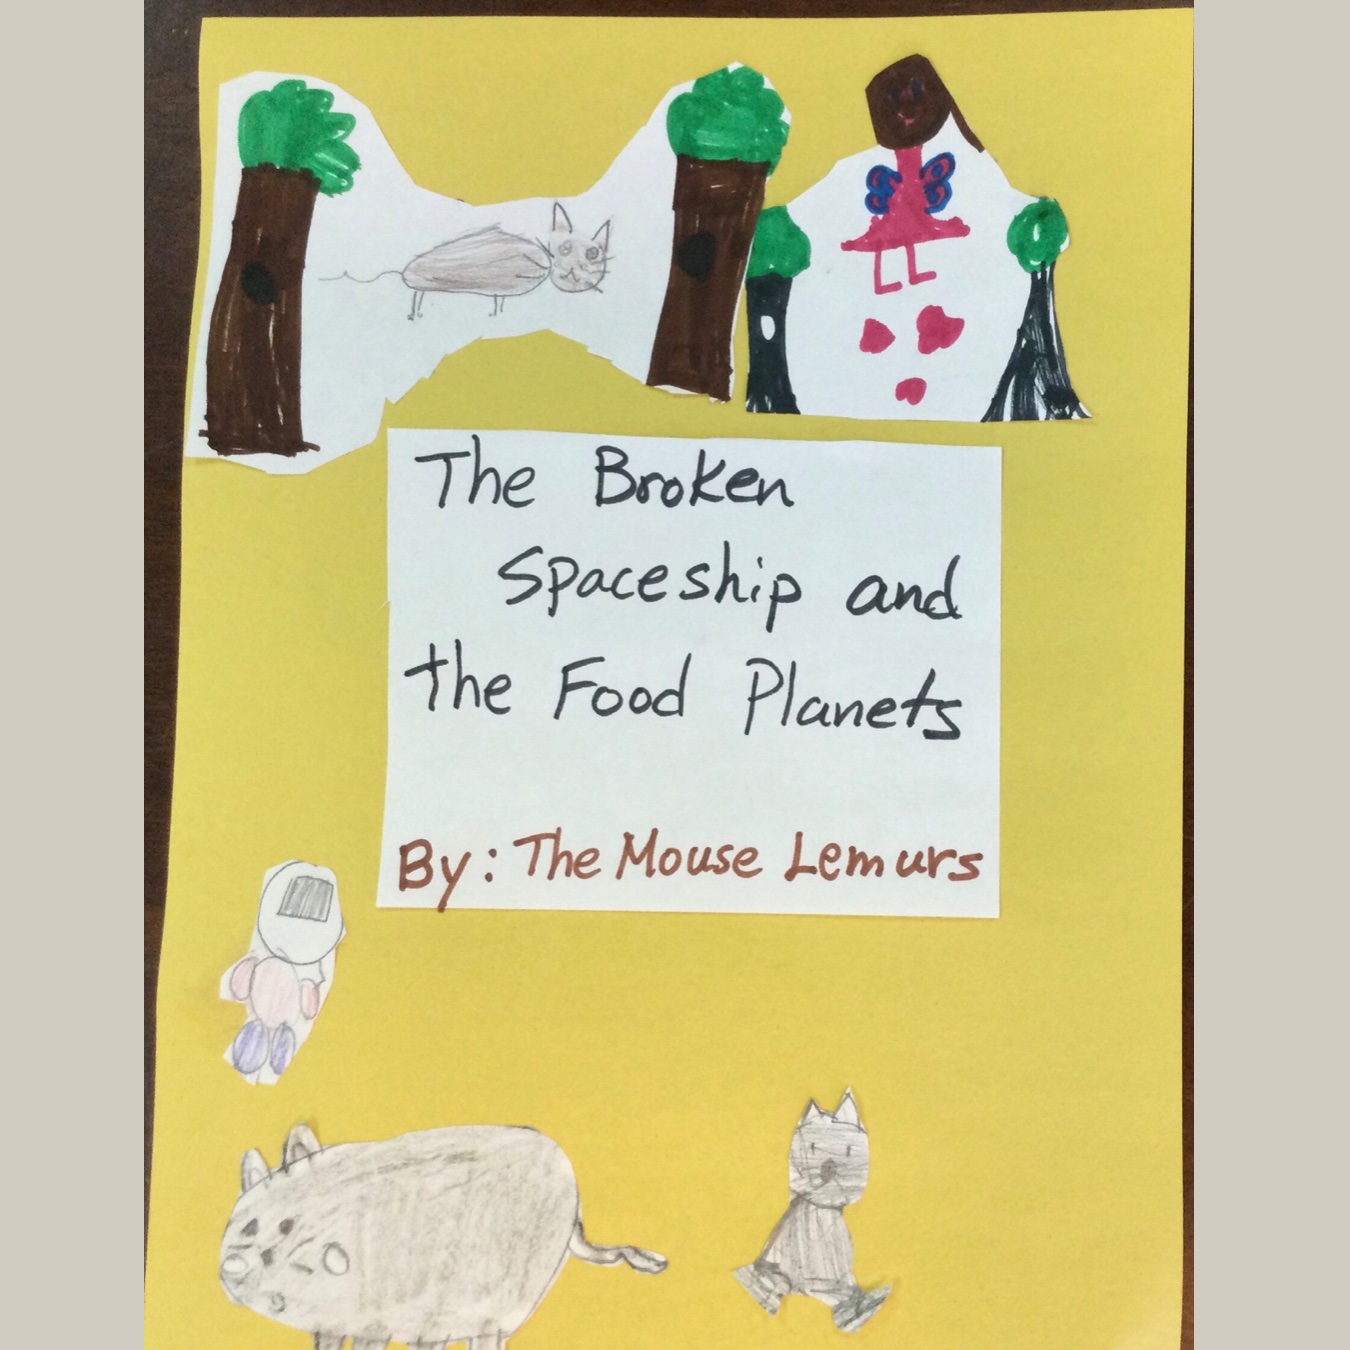 The Broken Spaceship and the Food Planets by Pleasanton – June 21 – 1st Grade